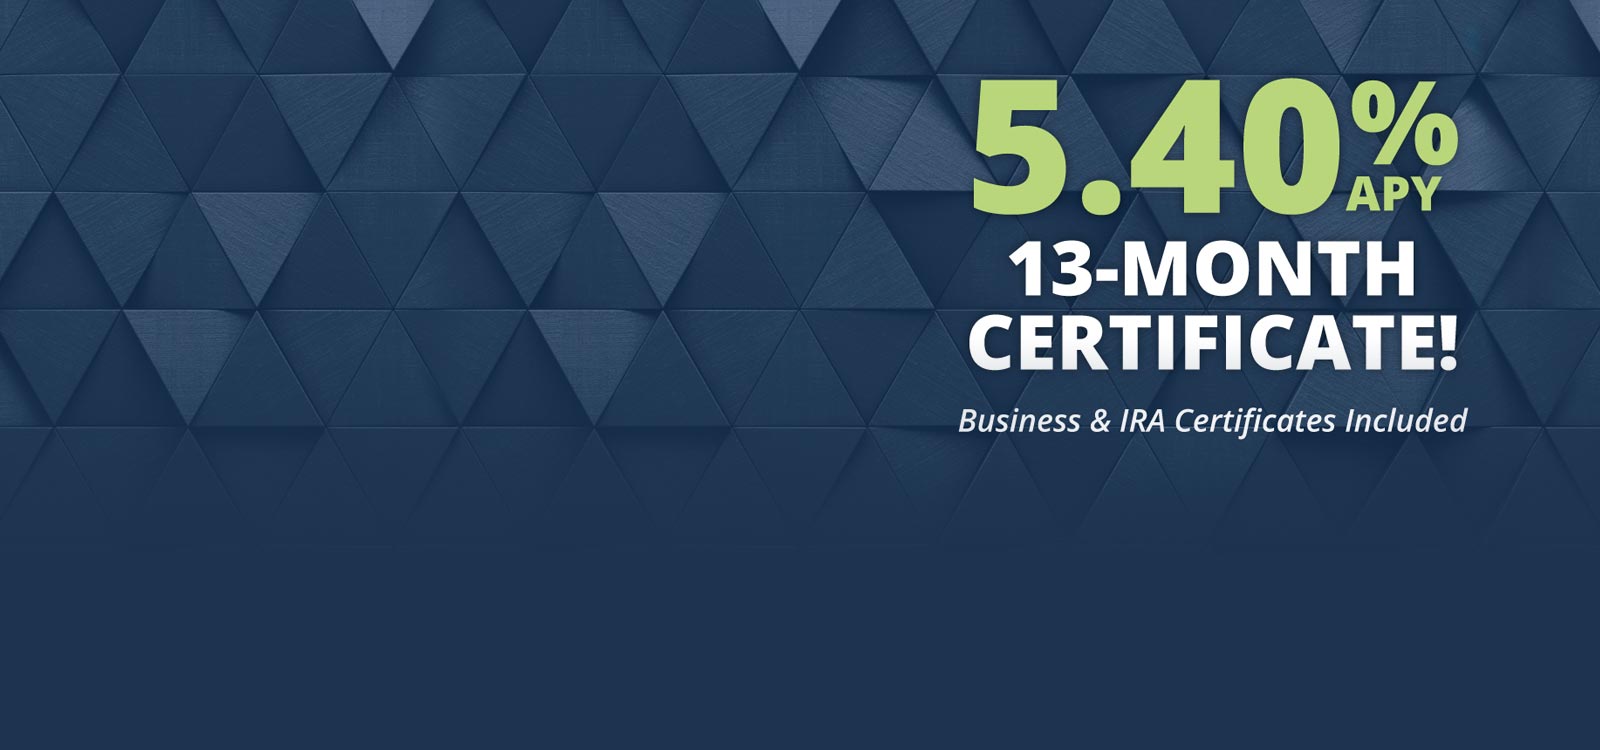 5.40% APY* 13-Month Certificate Special Offer Available! 